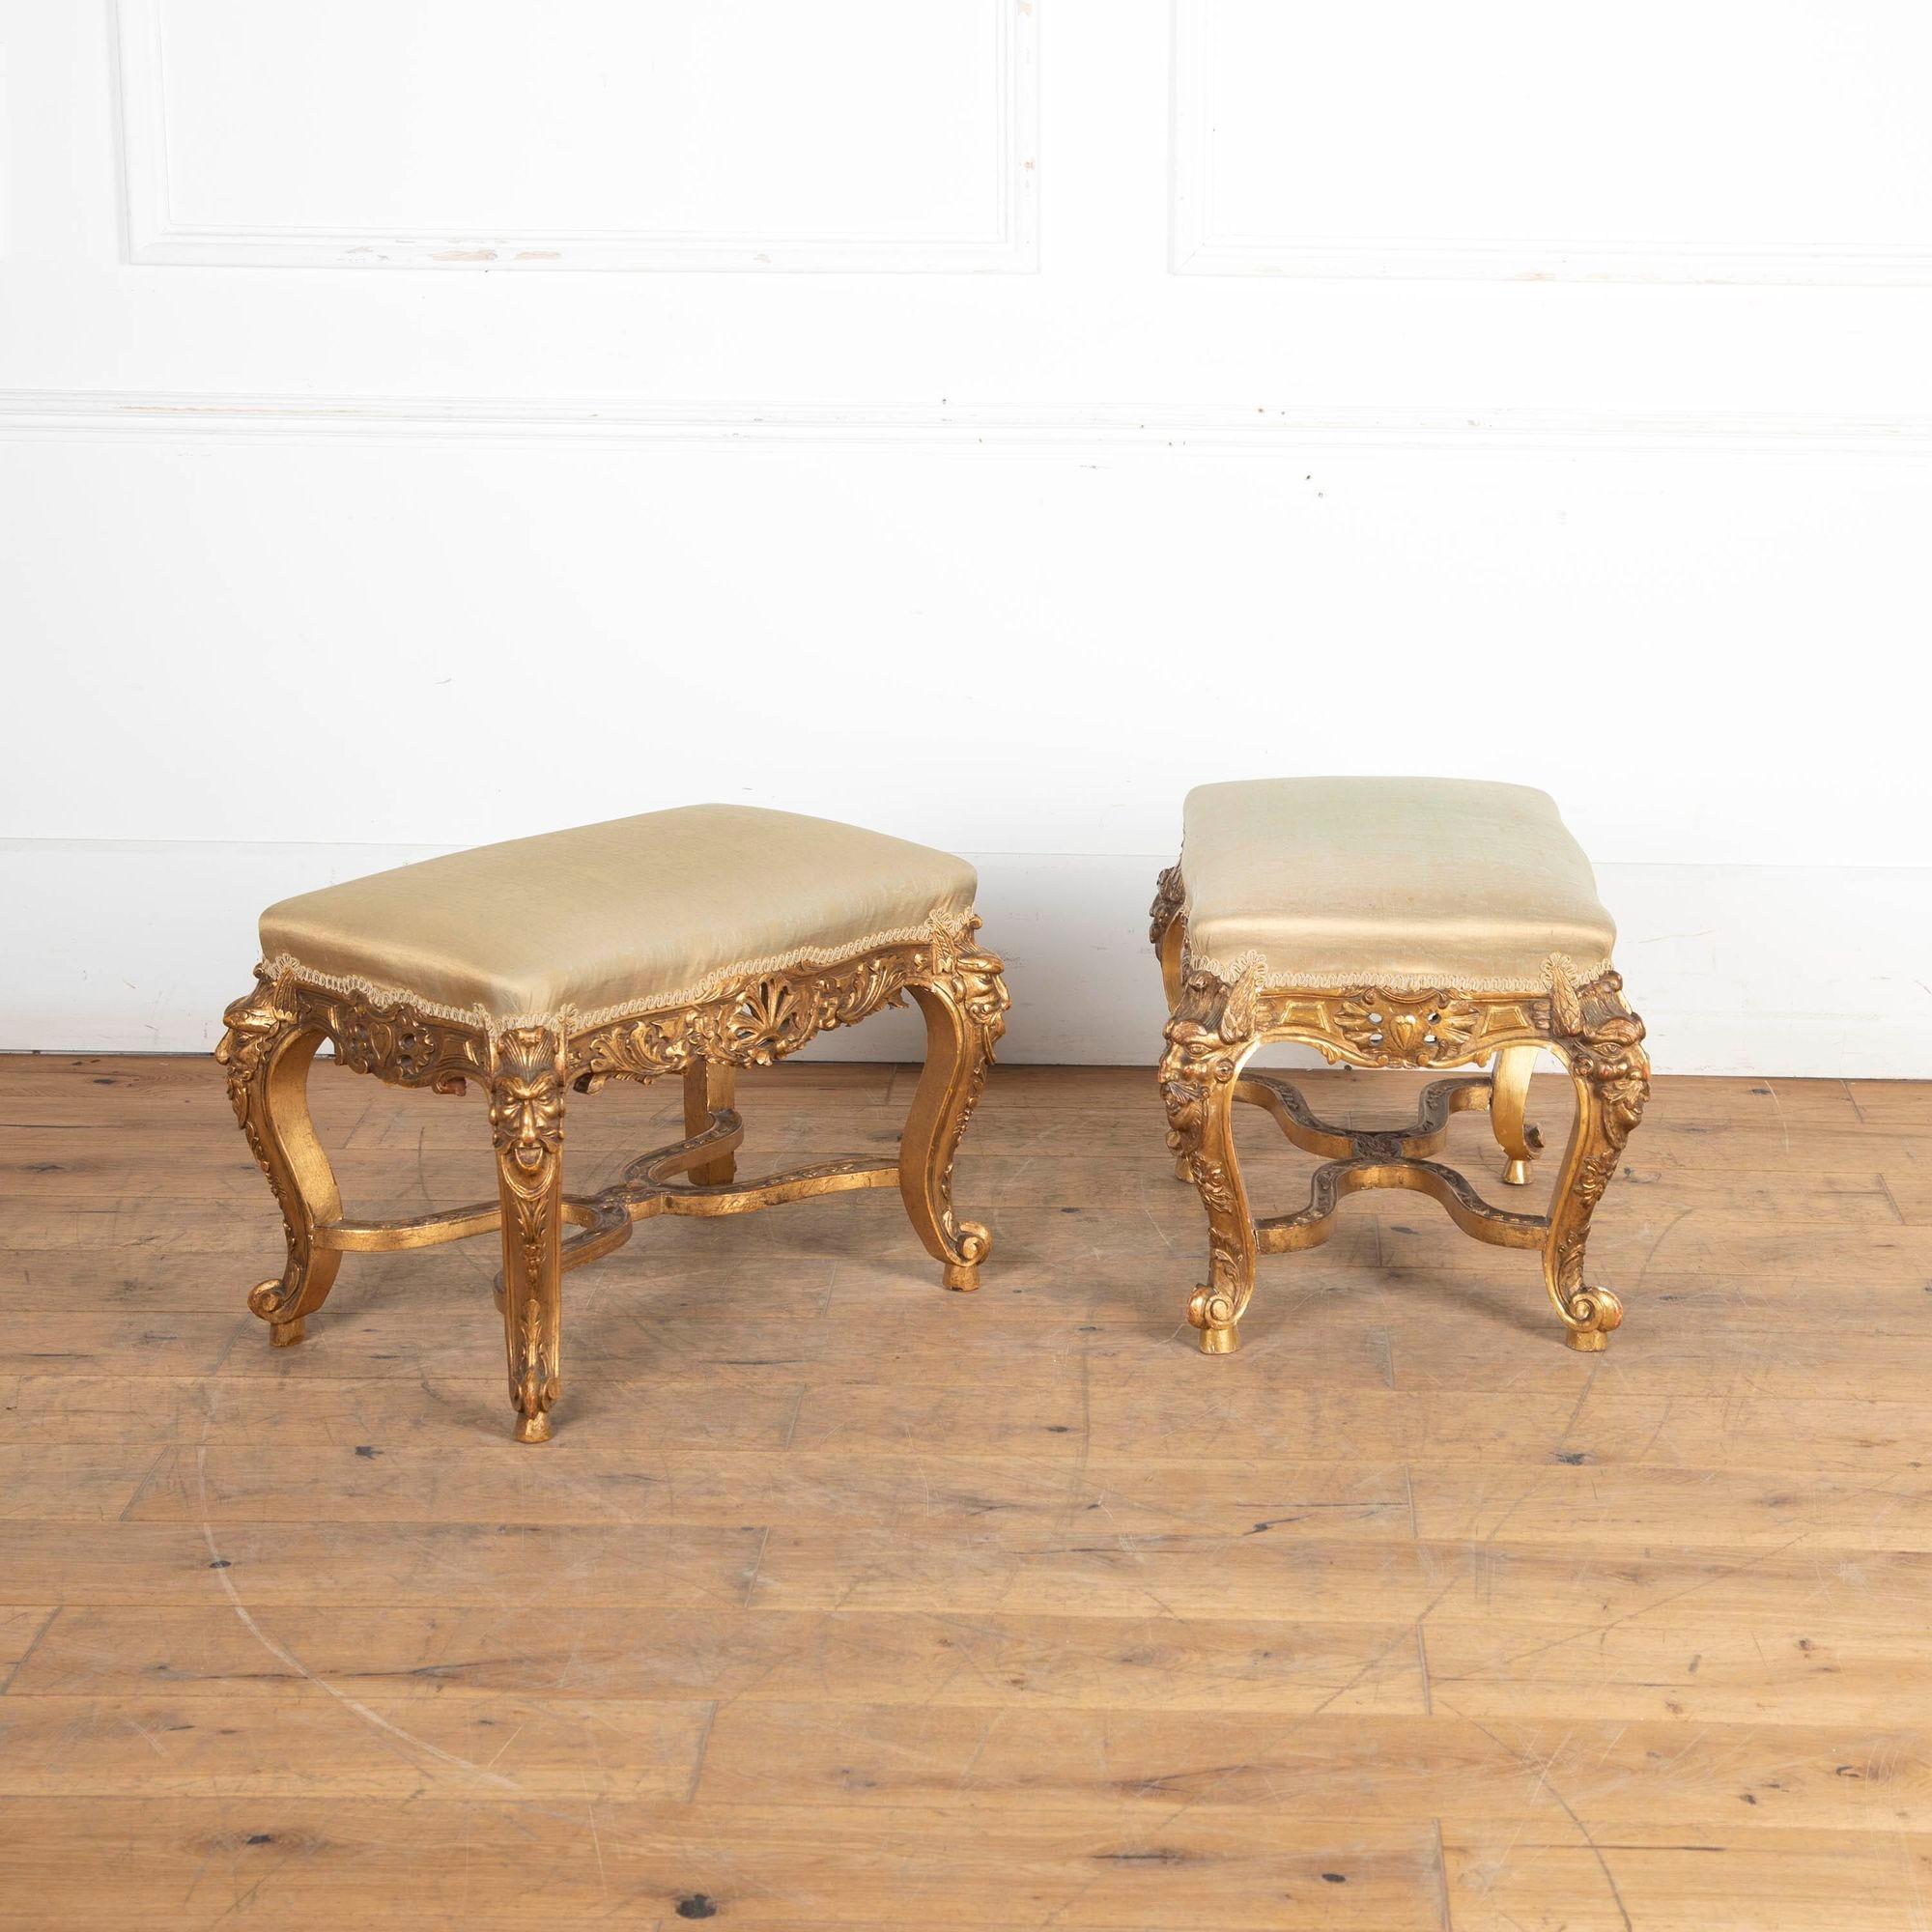 Highly decorative pair of 19th century carved giltwood stools with upholstered seats covered in antique water-patterned pale green silk.
The ornately carved aprons with trailing foliage on either side of pierced cartouches and flanked by cabriole